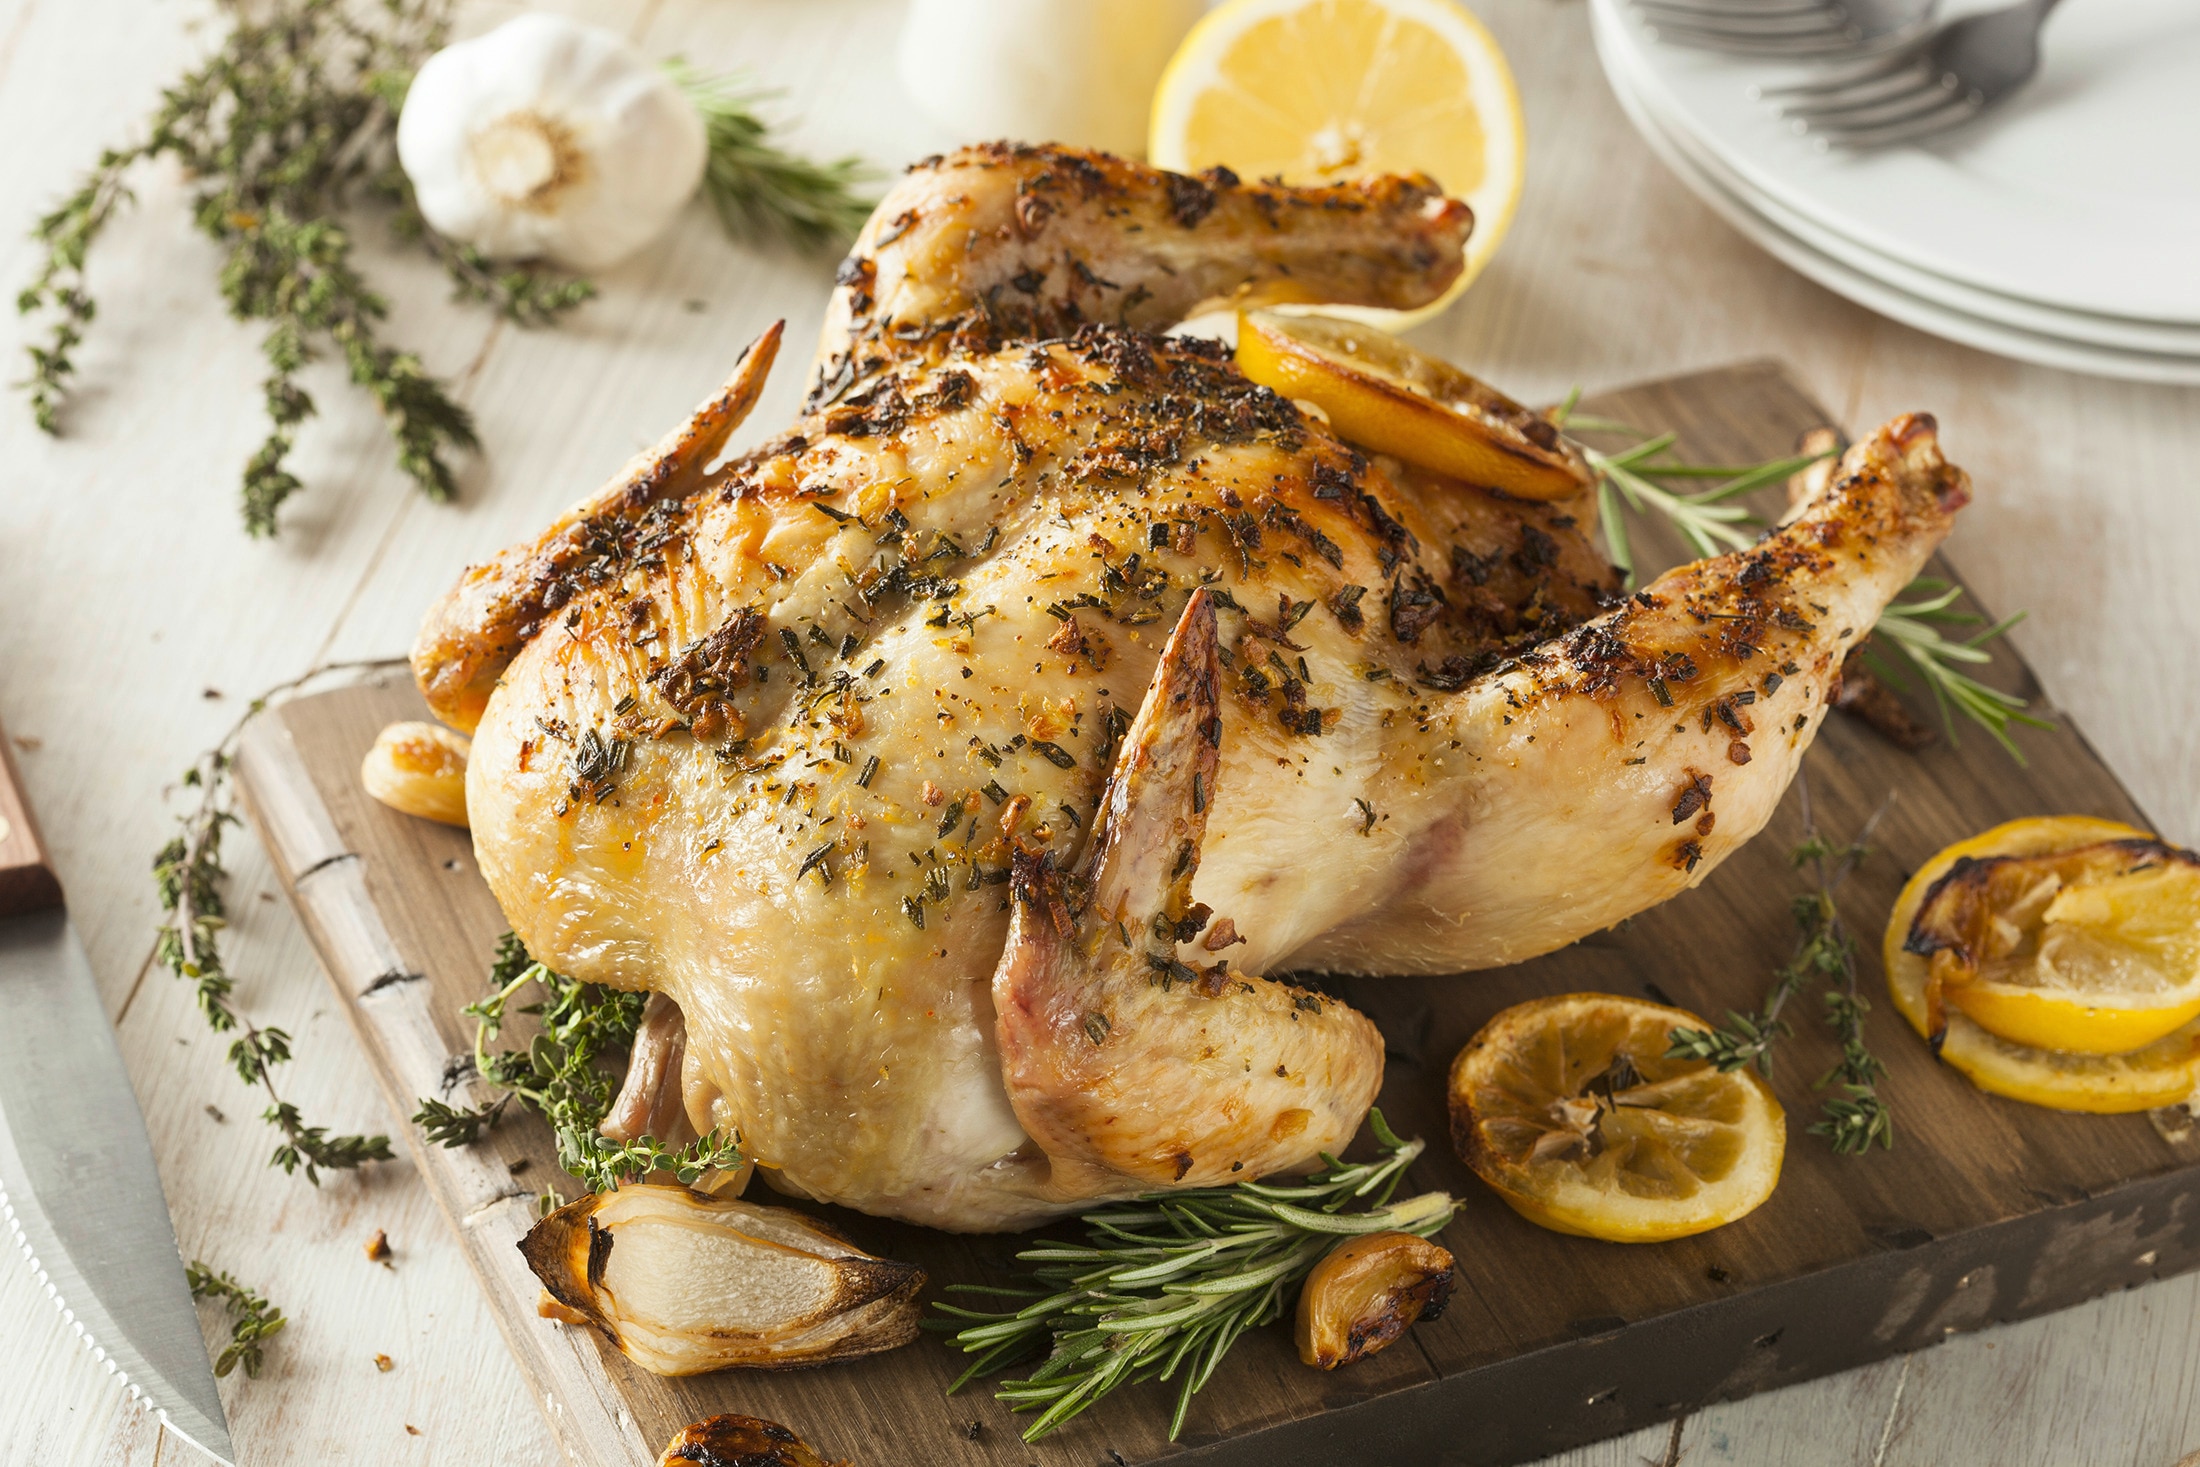 A cutting board with a whole baked chicken garnished with herbs